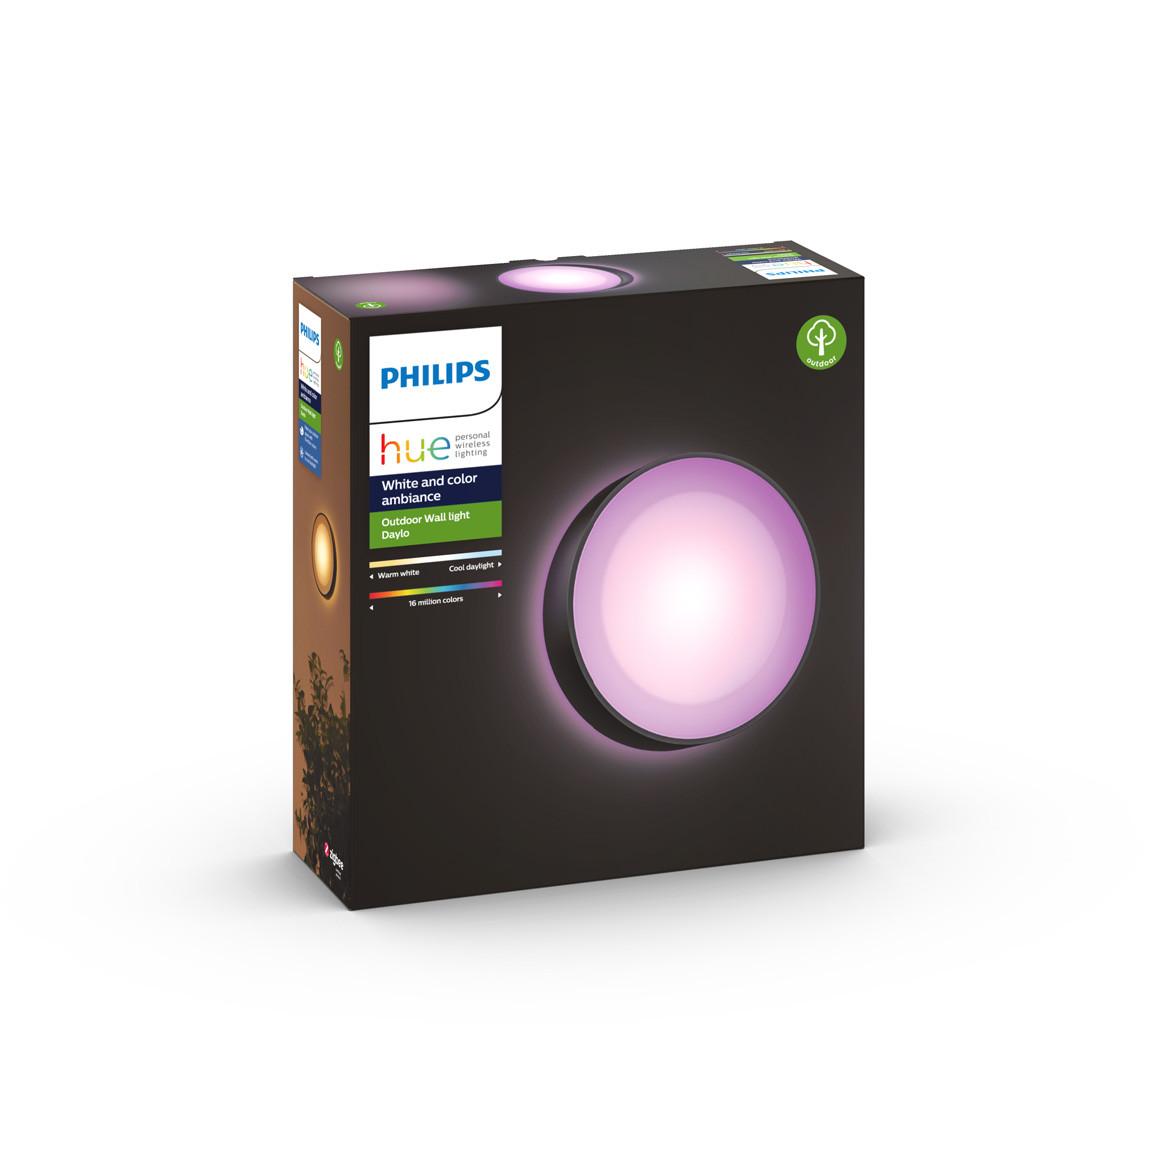 Philips Hue Wandleuchte Daylo Verpackung